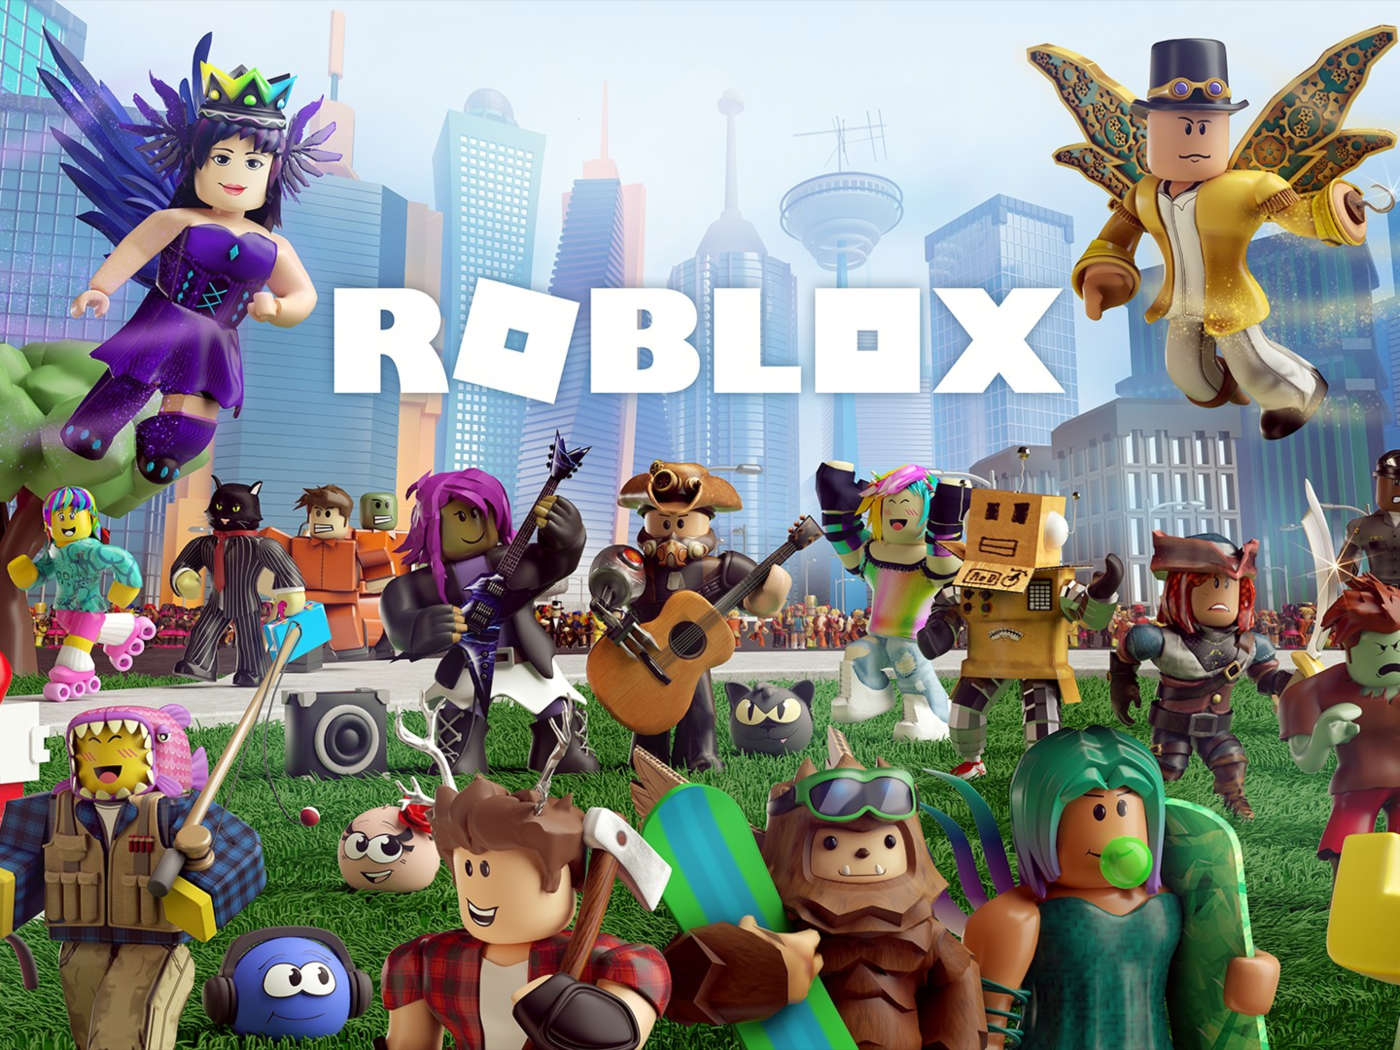 Step into the World of Roblox: How to Download and Play the Game